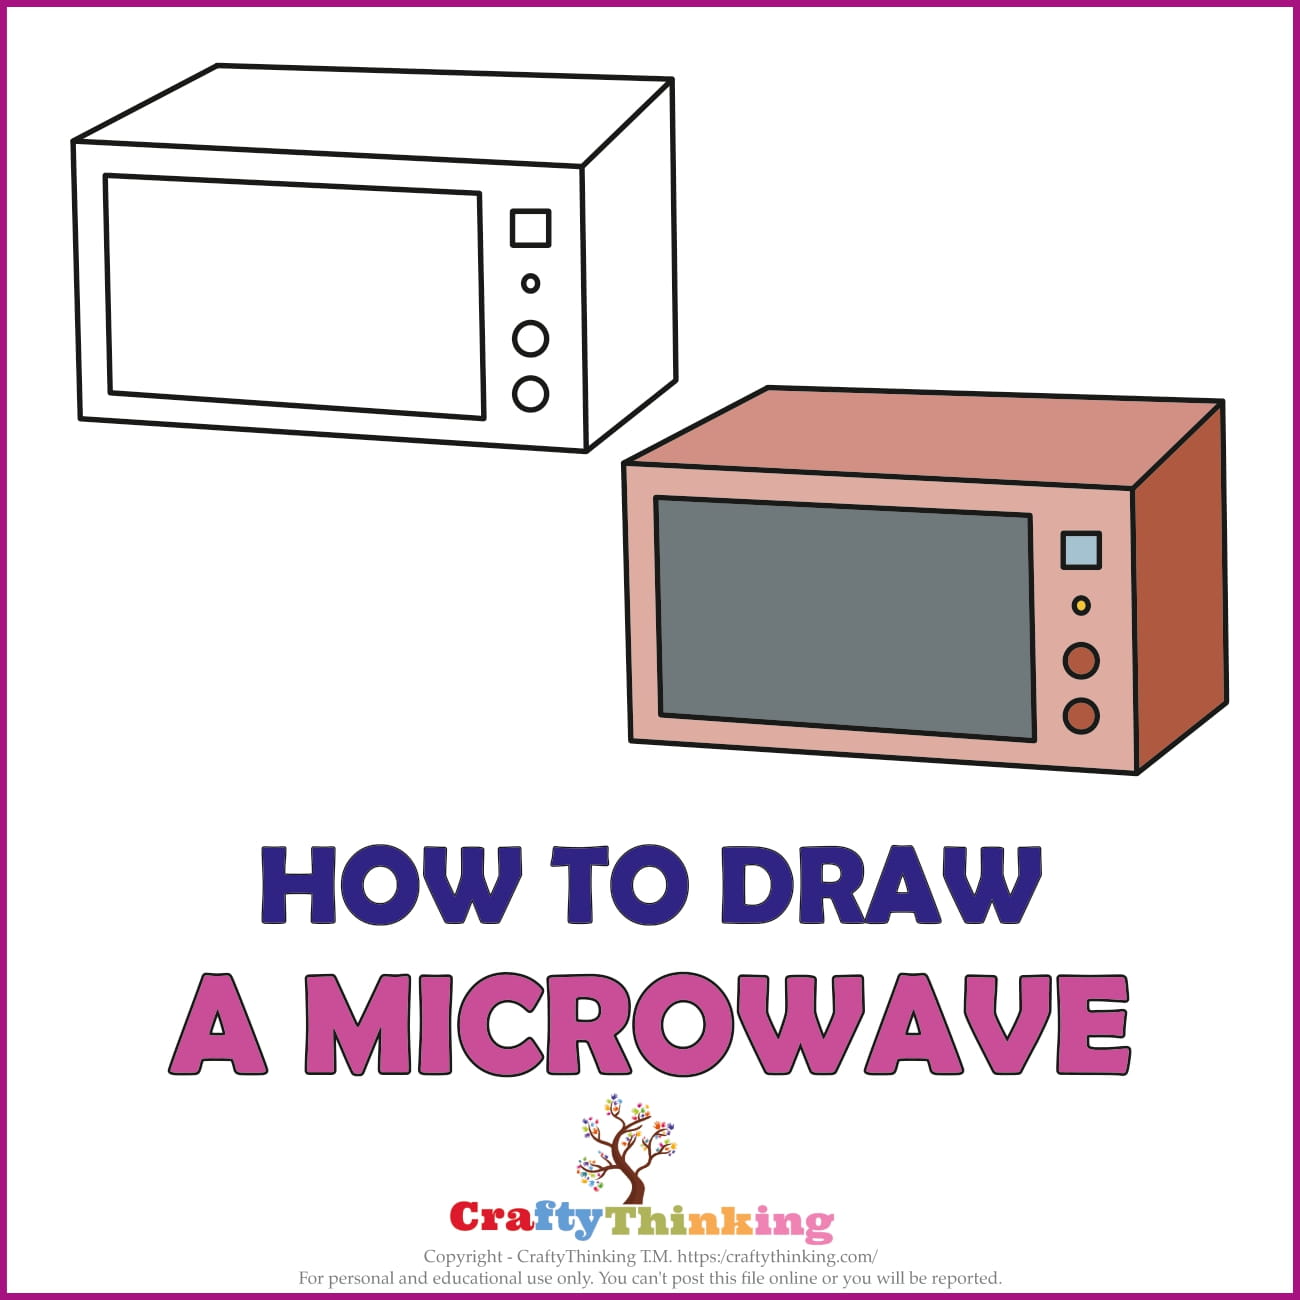 How to Draw a Microwave CraftyThinking